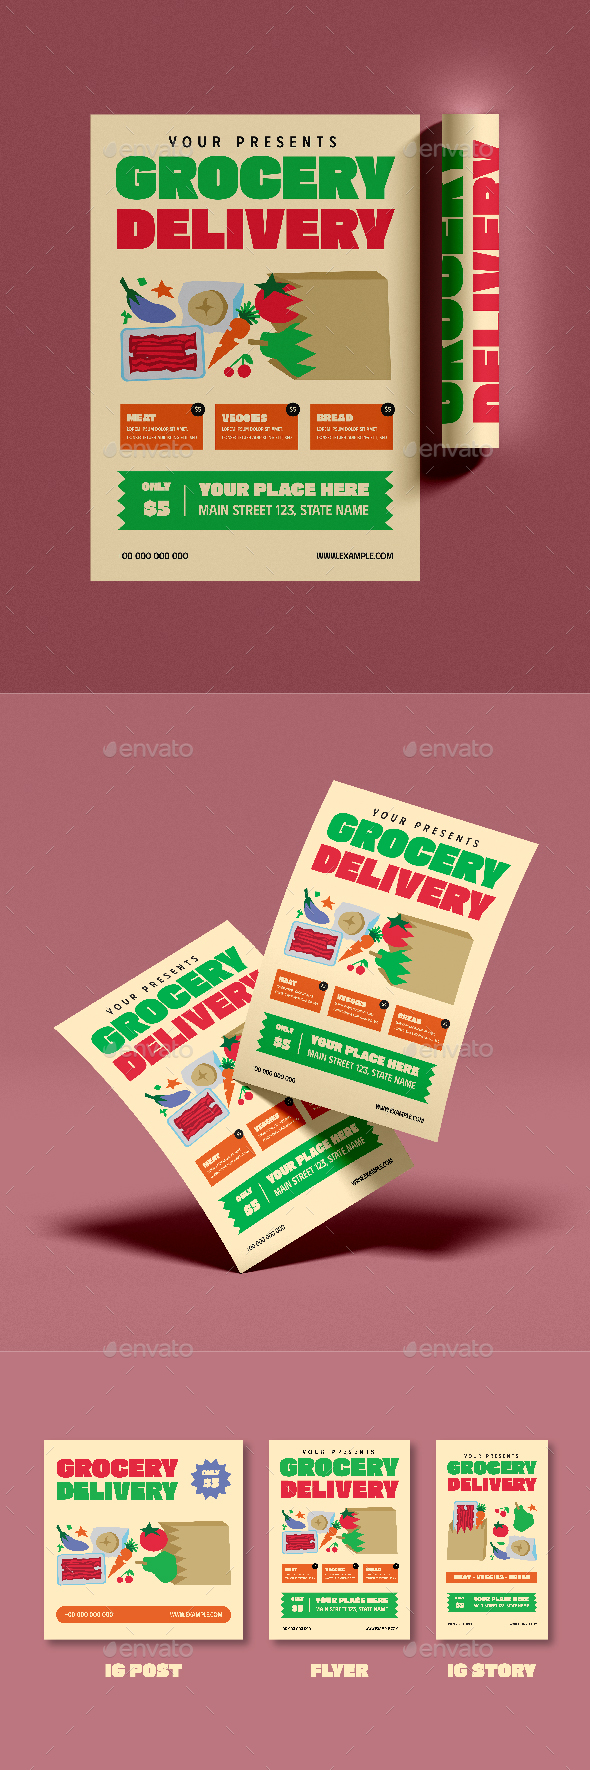 Flat Grocery Delivery Flyer Set